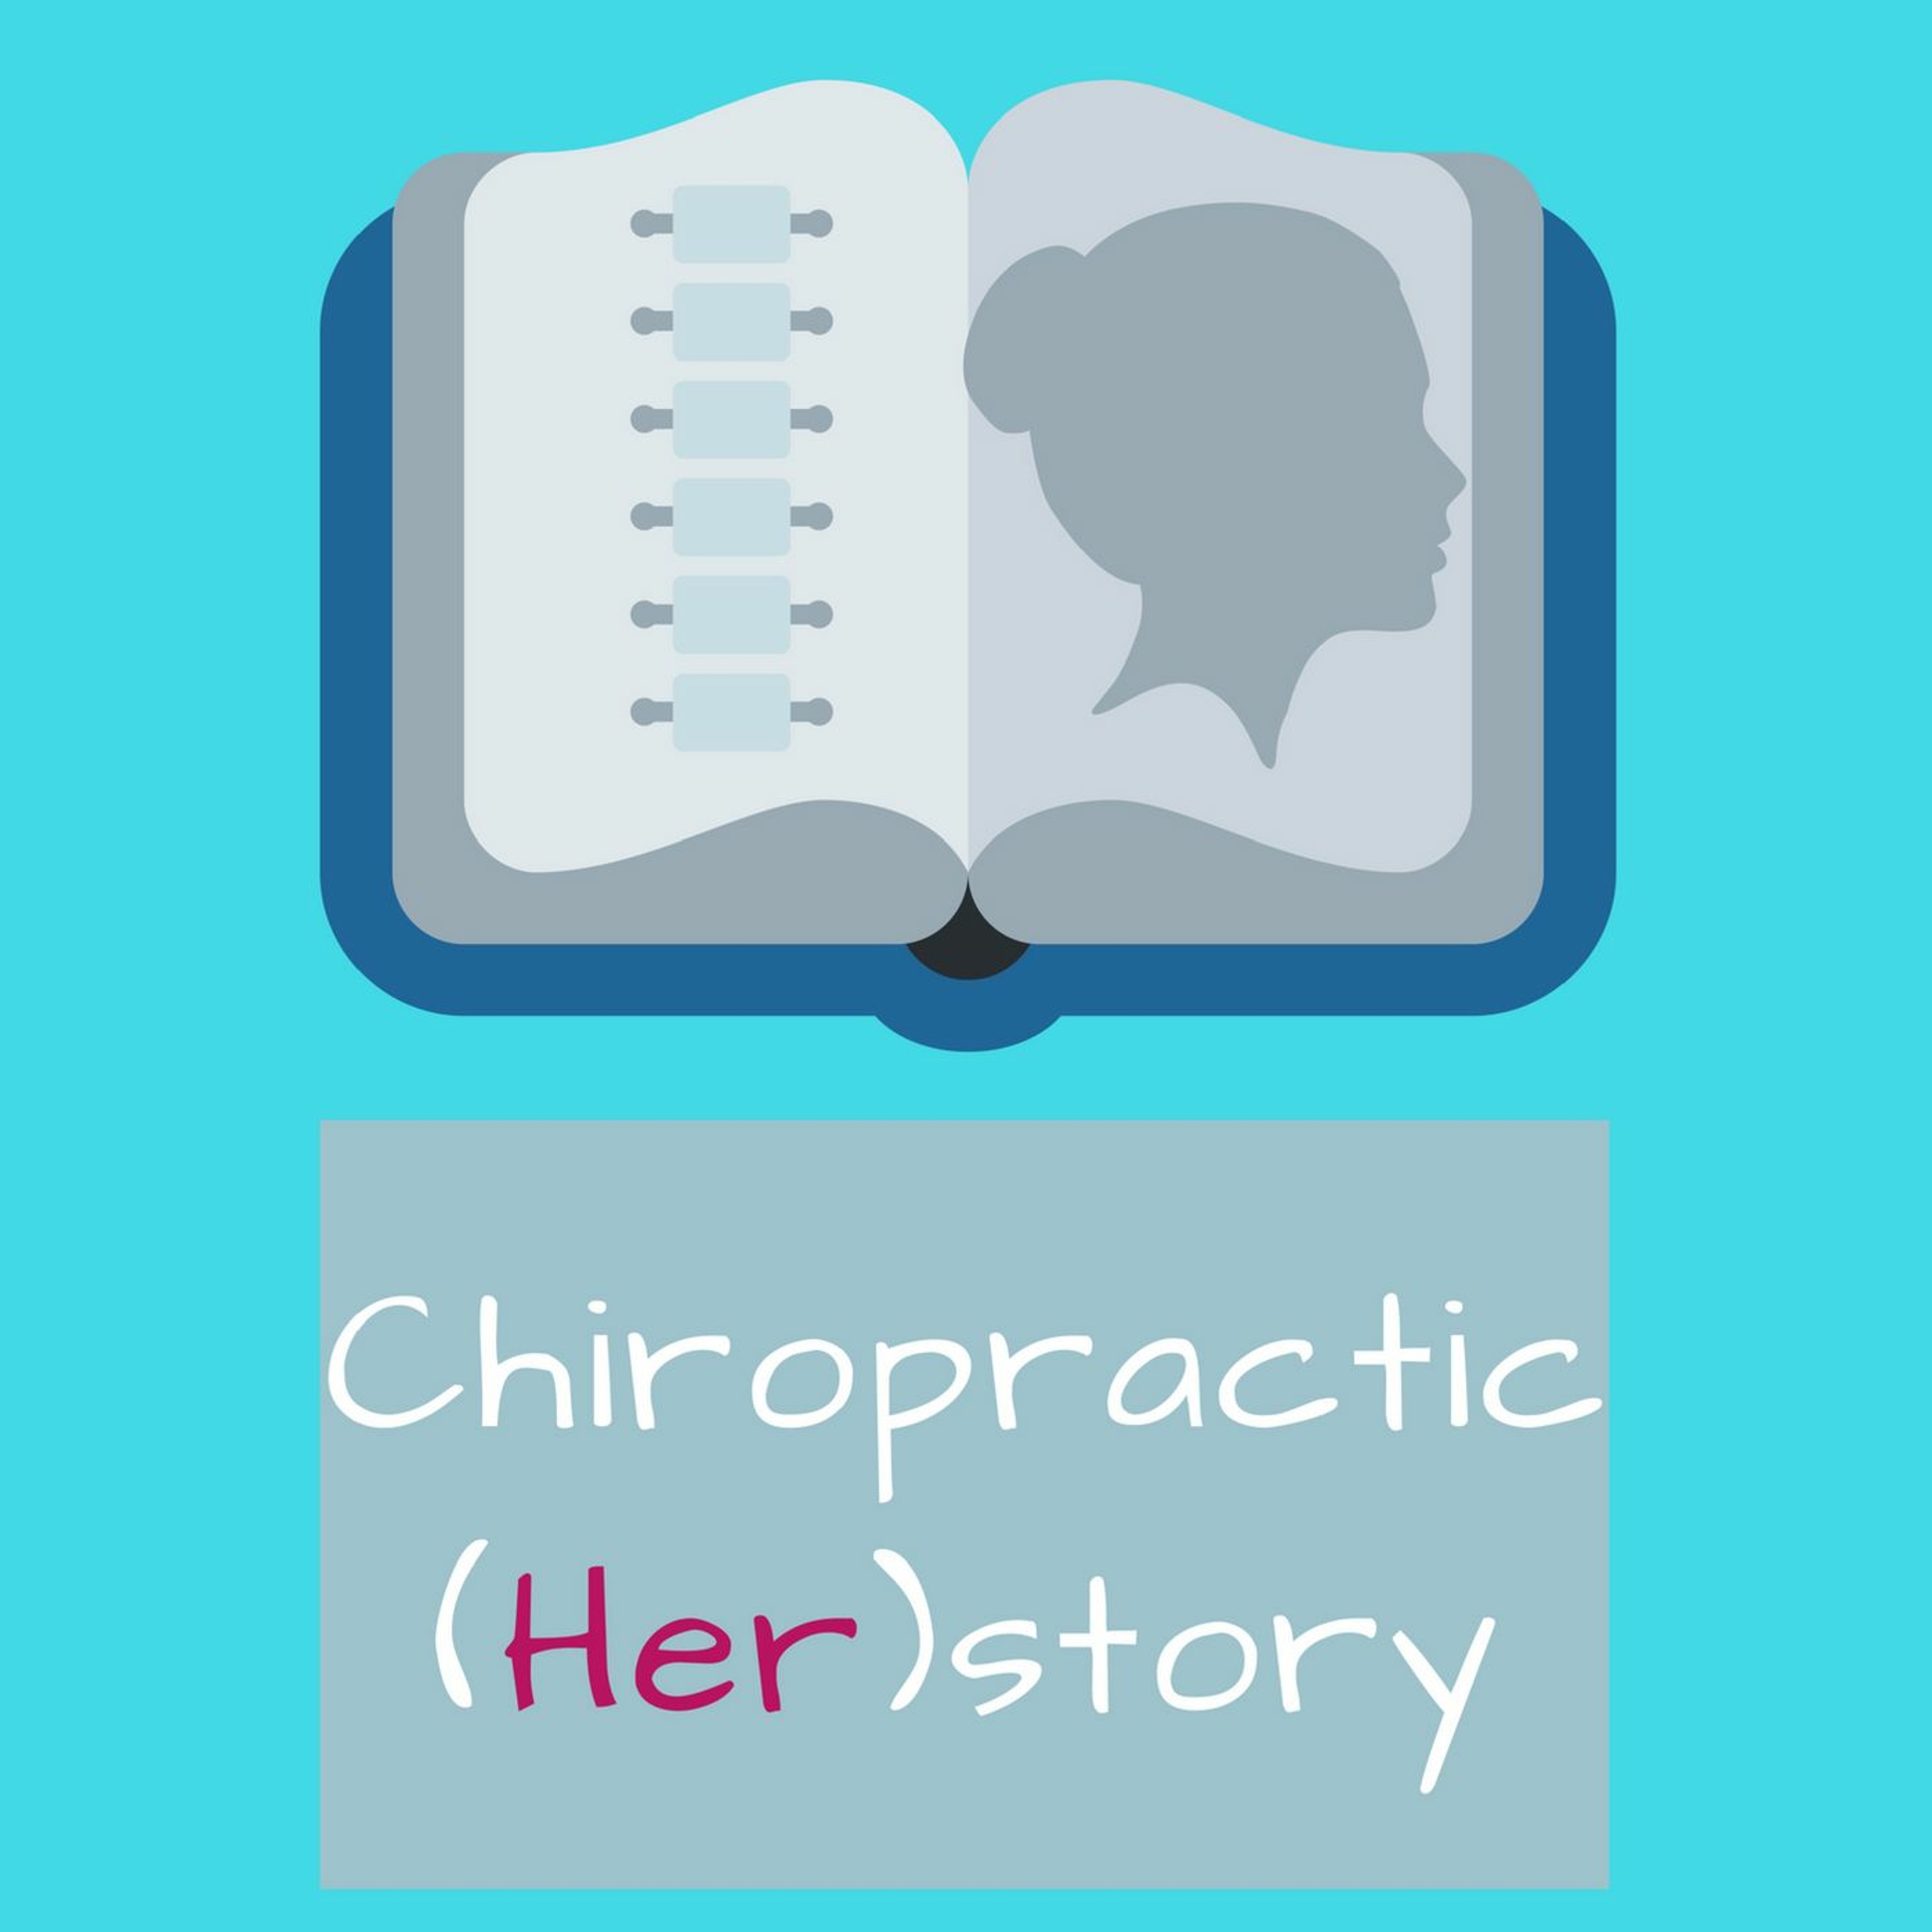 Dr. Shea Stark- Chiropractic (Her)story Episode 52